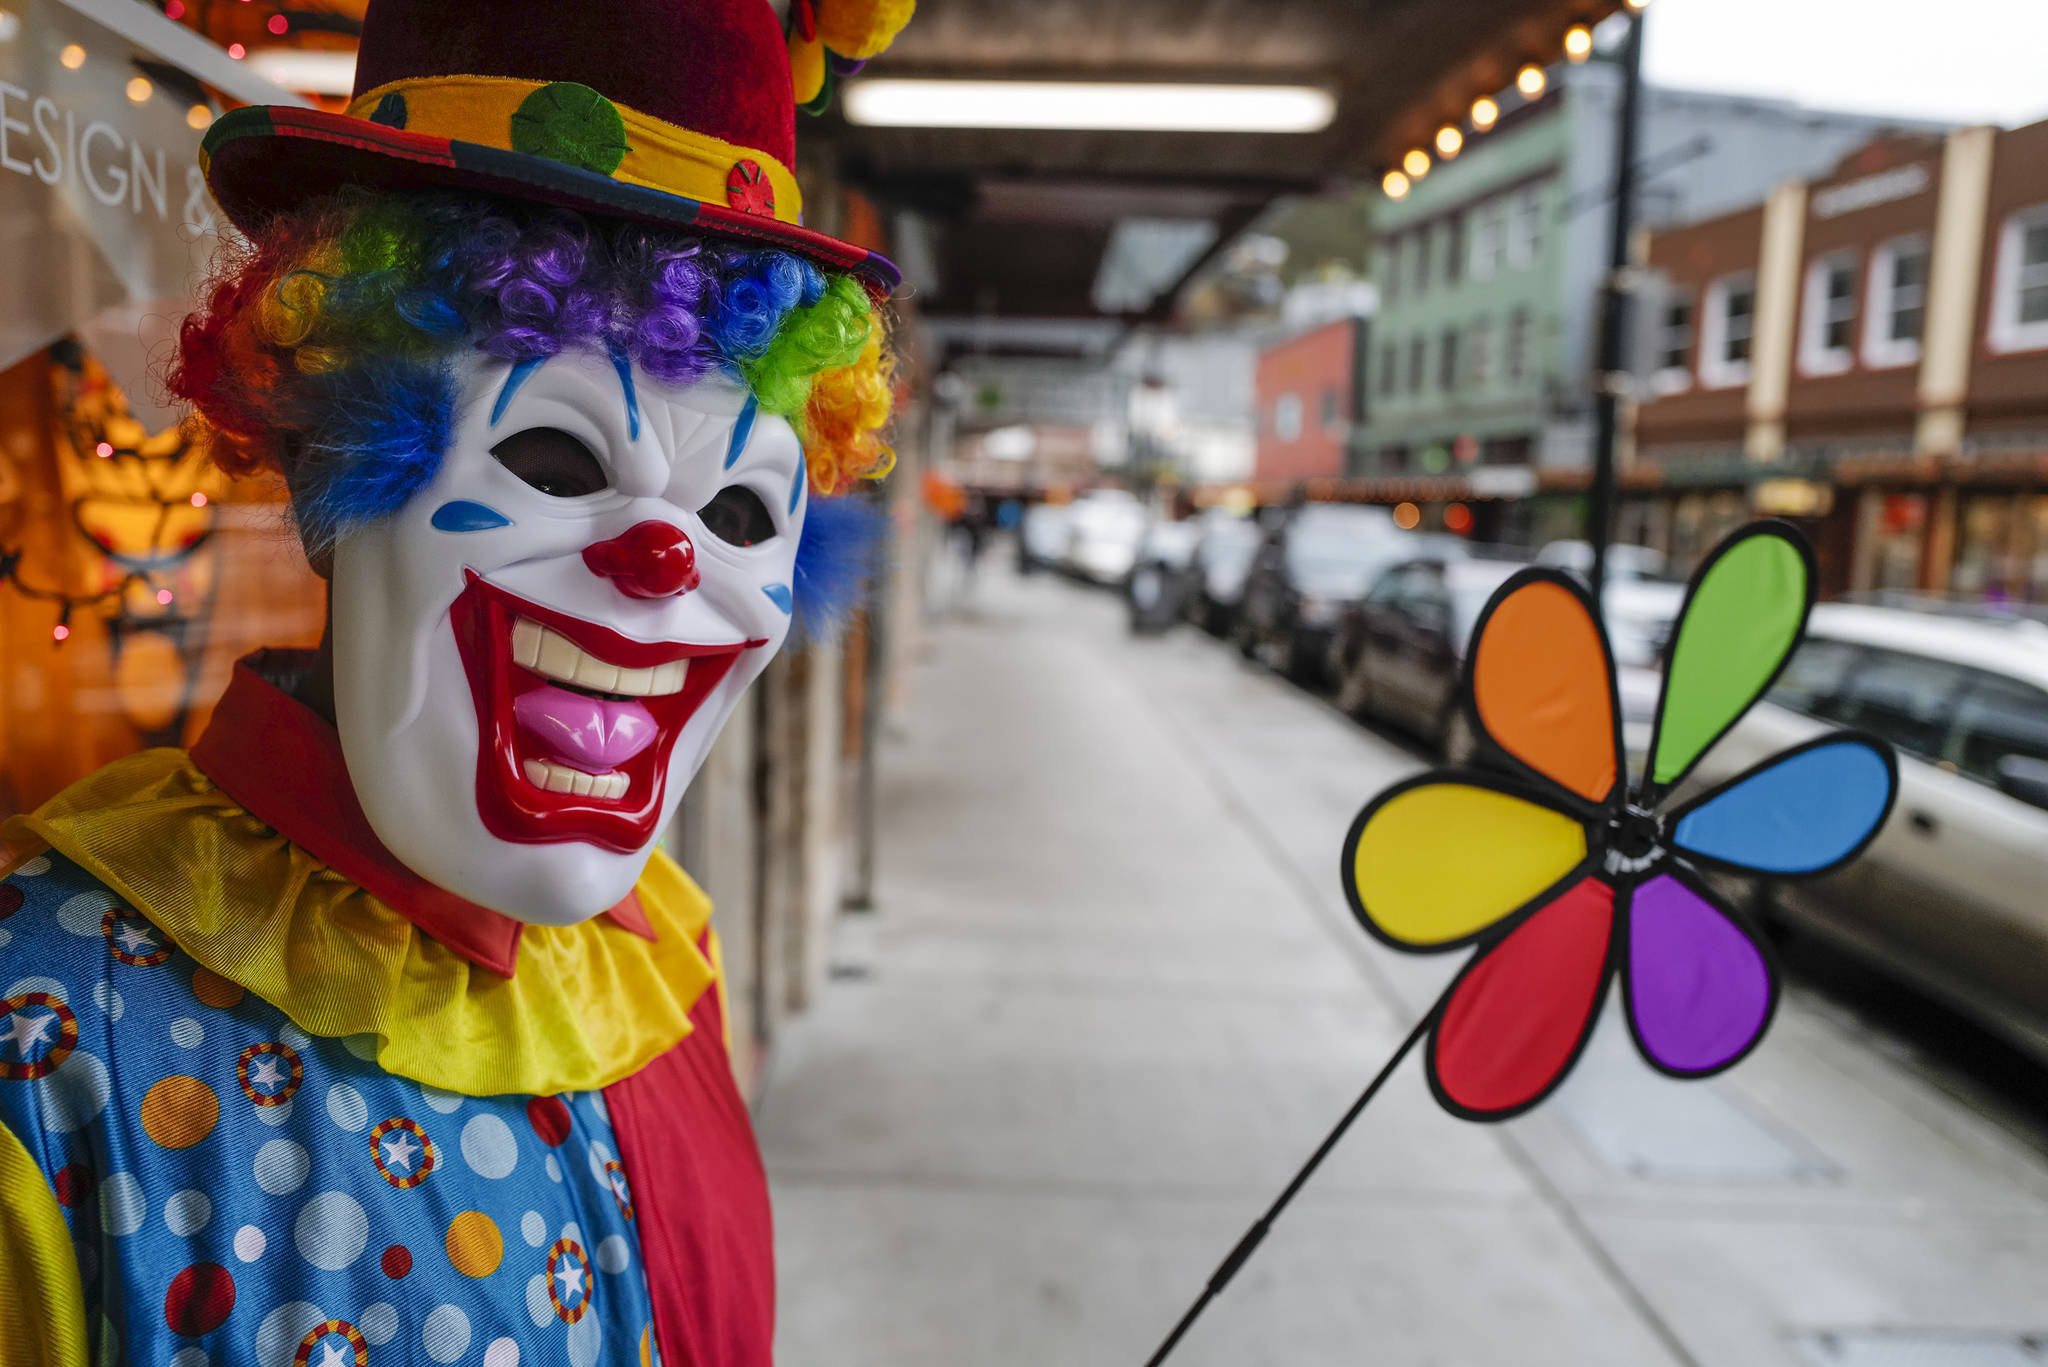 Rico Worl, of The Trickster, waits to greet children during the Trick or Treat Downtown event on Thursday, Oct. 31, 2019. More than 70 business put out orange balloons to participate in the event aimed at young children. (Michael Penn | Juneau Empire)